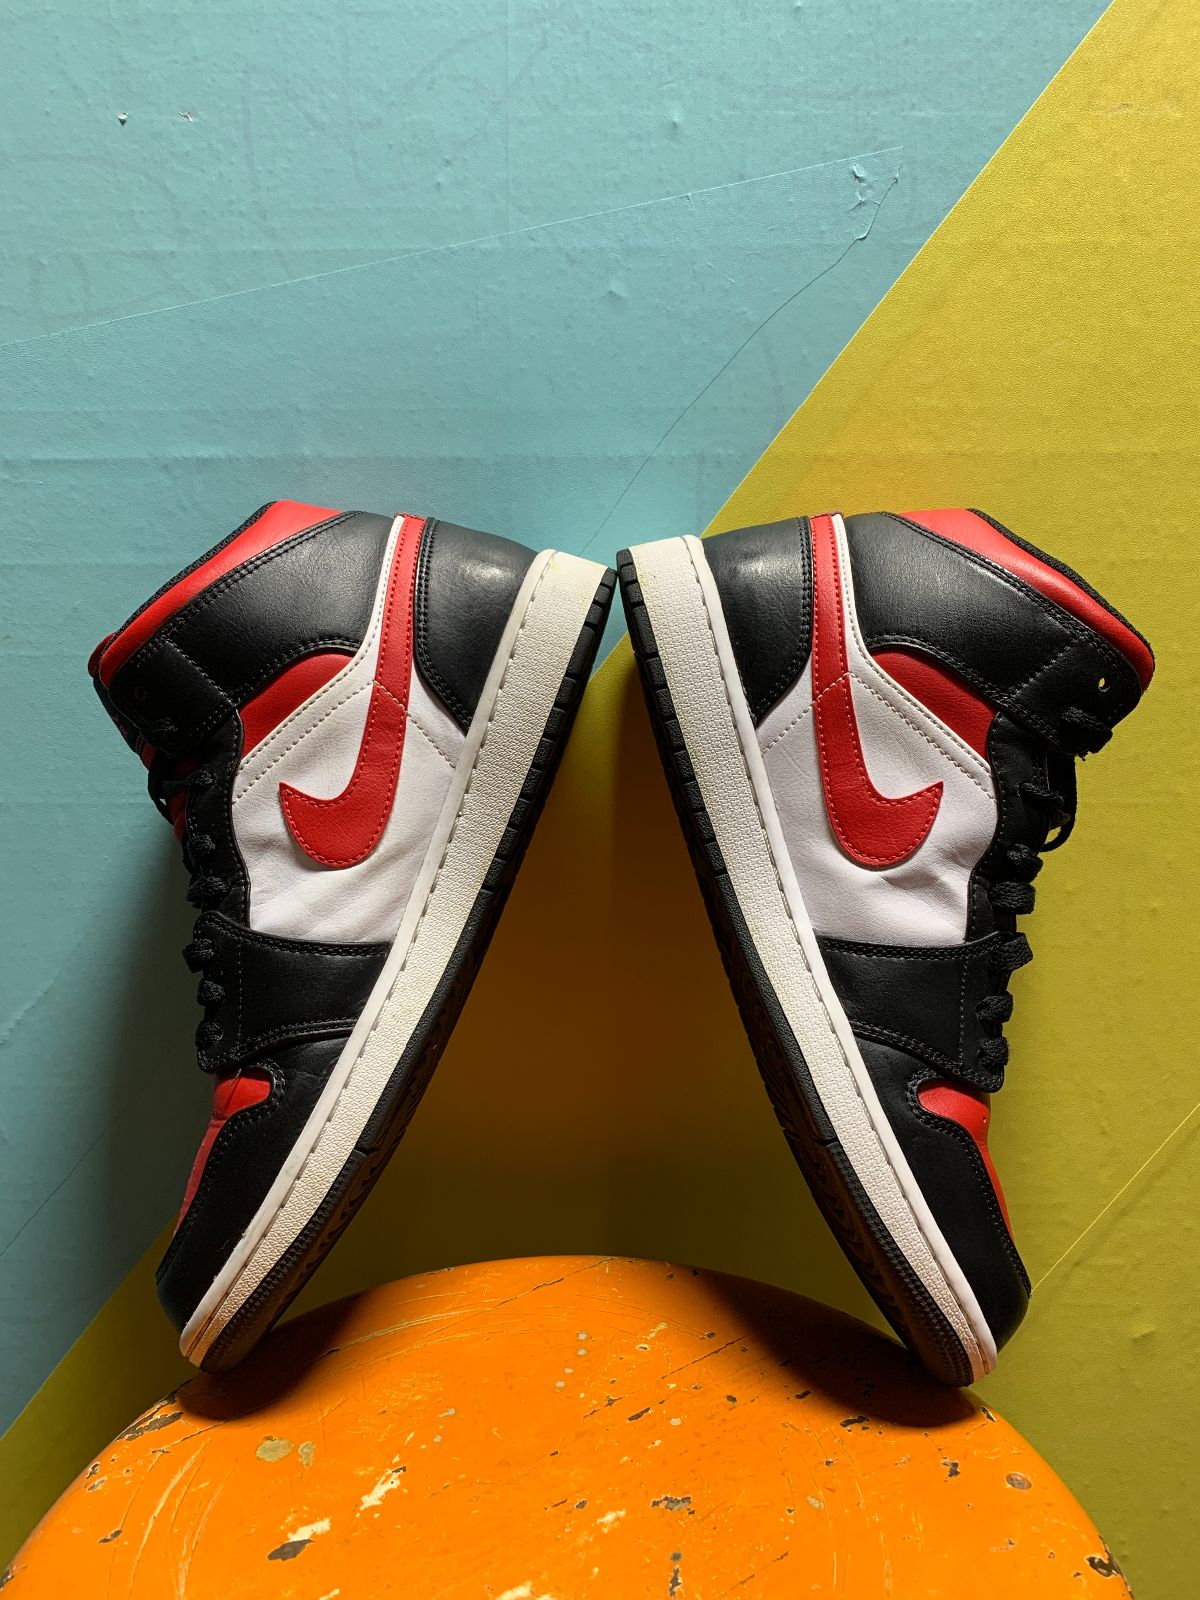 Nike Air Jordan 1 Mid Shoes Bred Toe Black Fire Red White Sneakers